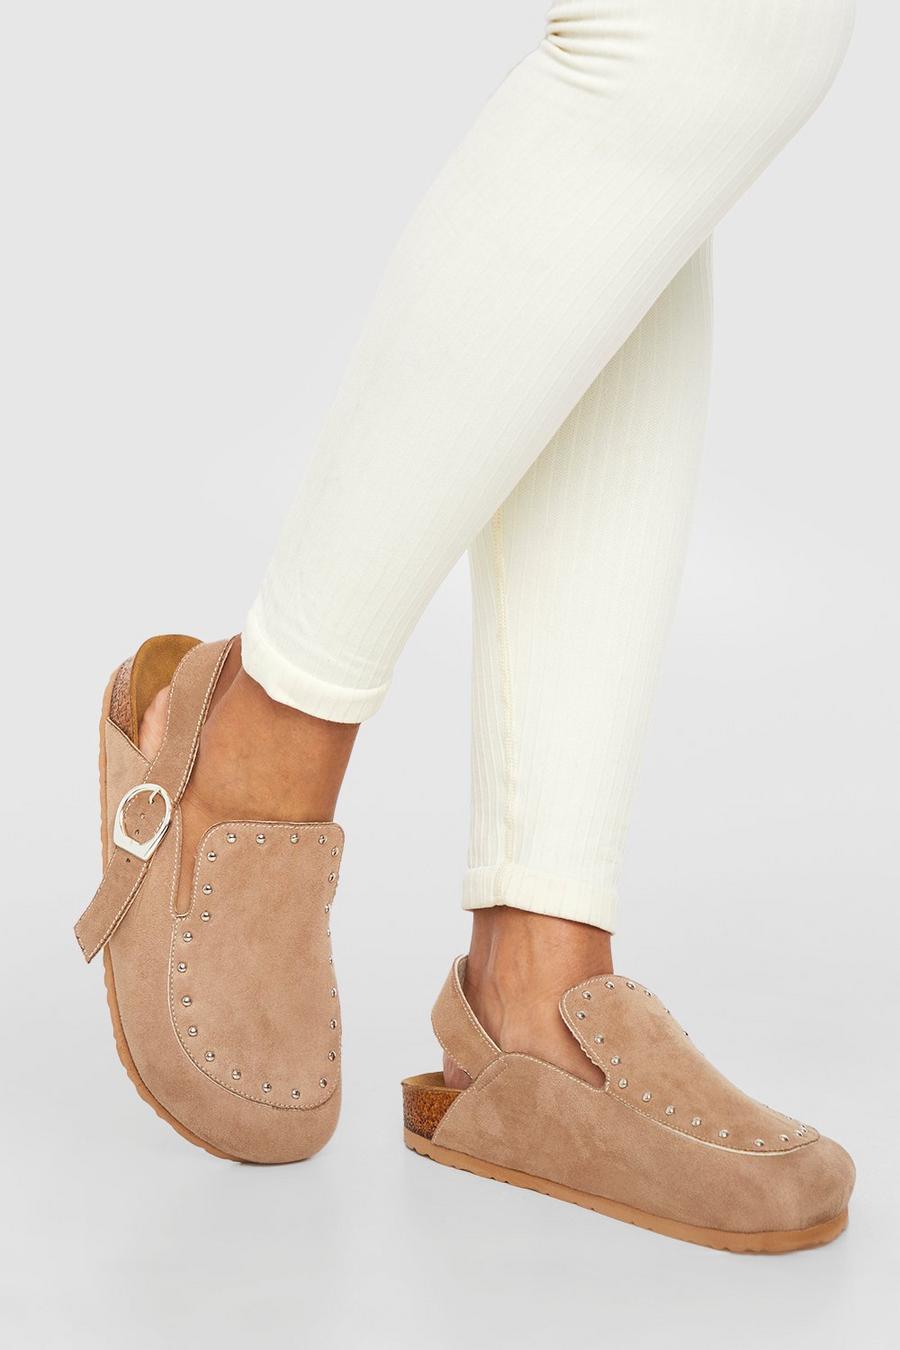 Taupe beige Closed Toe Studded Clogs